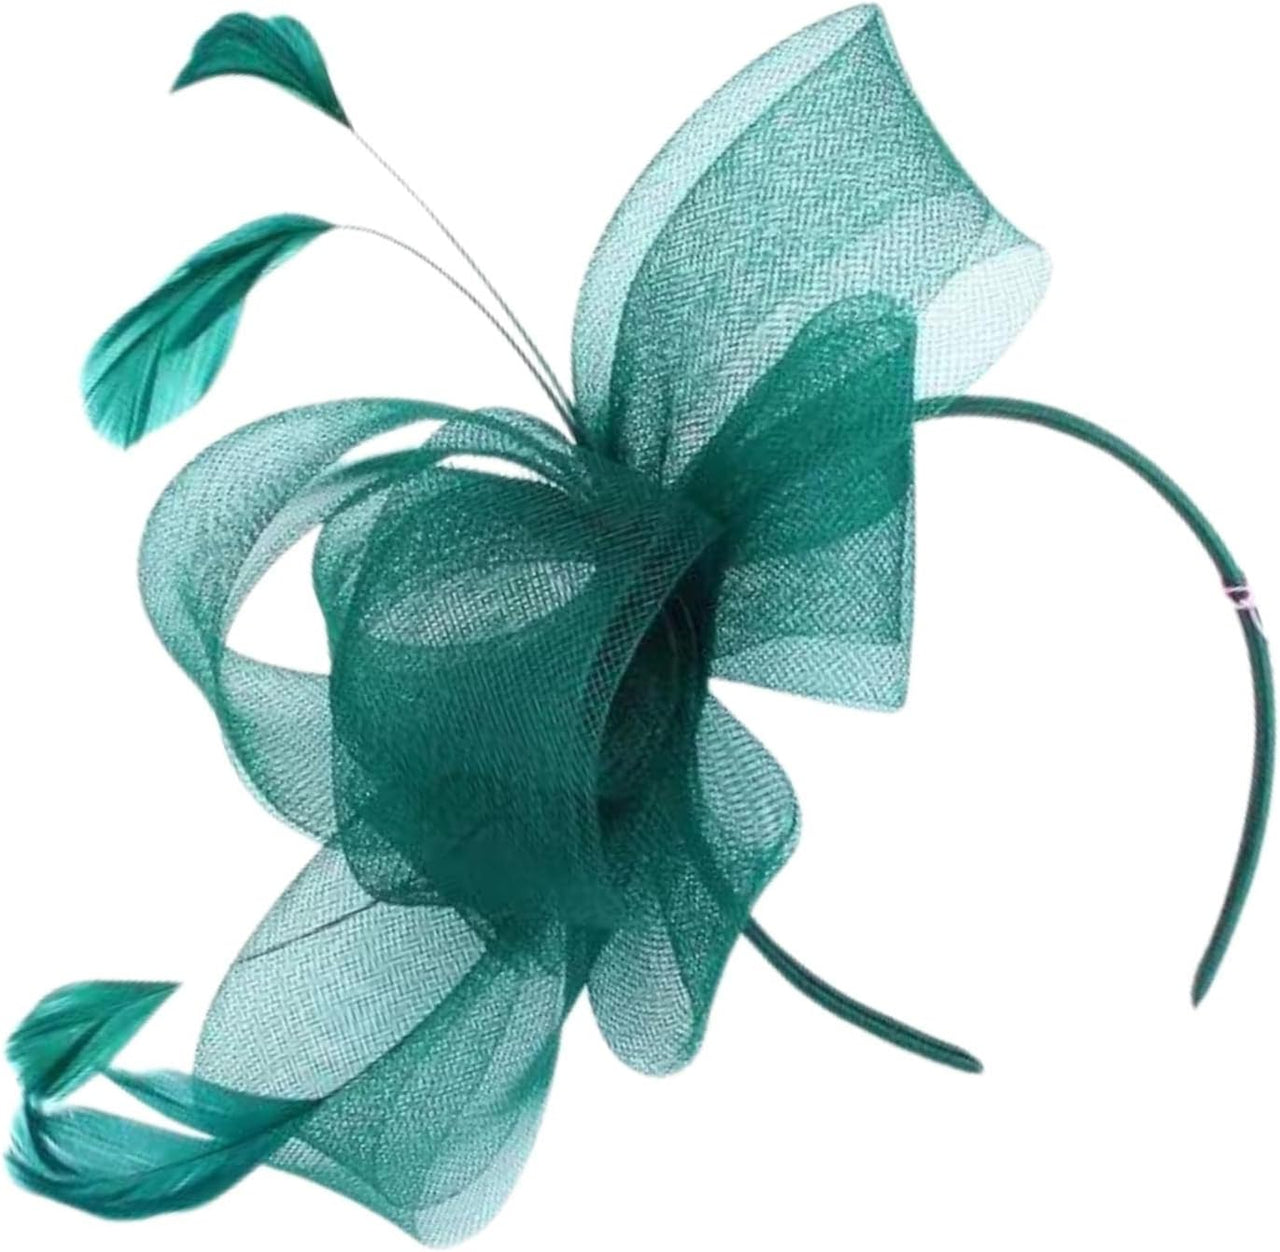 Discover the Most Stunning Fascinator Hair Accessories